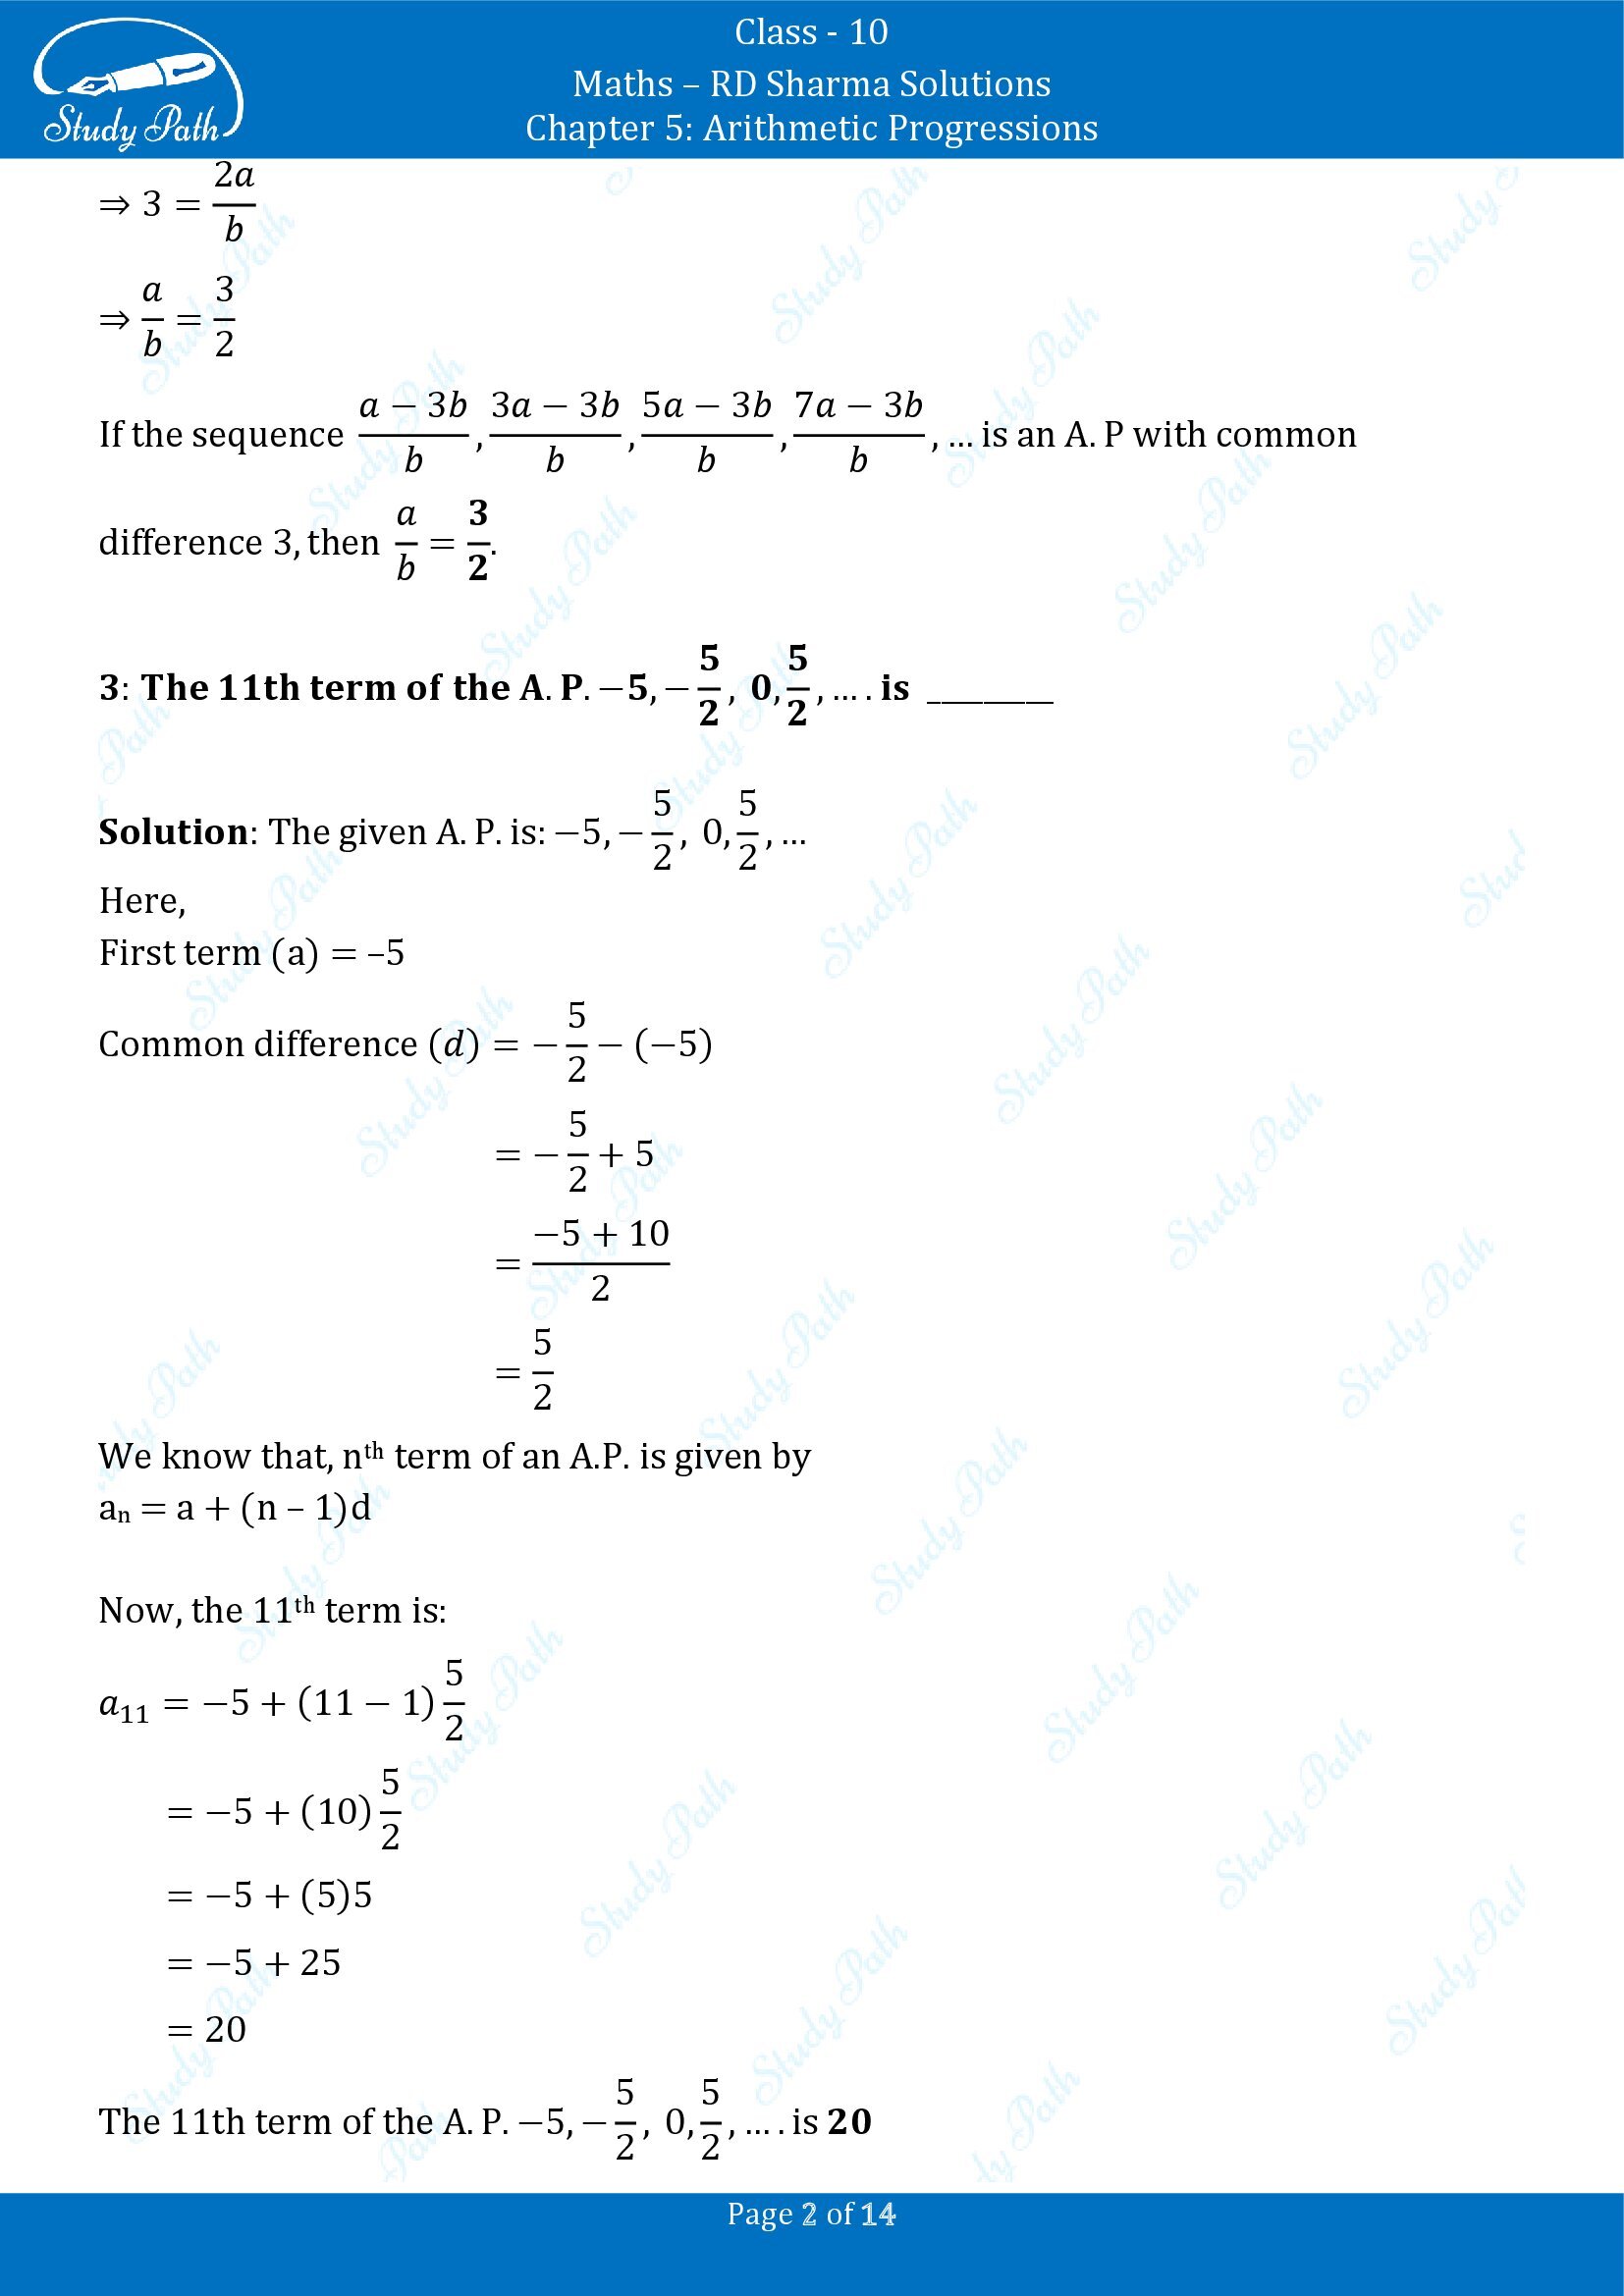 RD Sharma Solutions Class 10 Chapter 5 Arithmetic Progressions Fill in the Blank Type Questions FBQs 00002